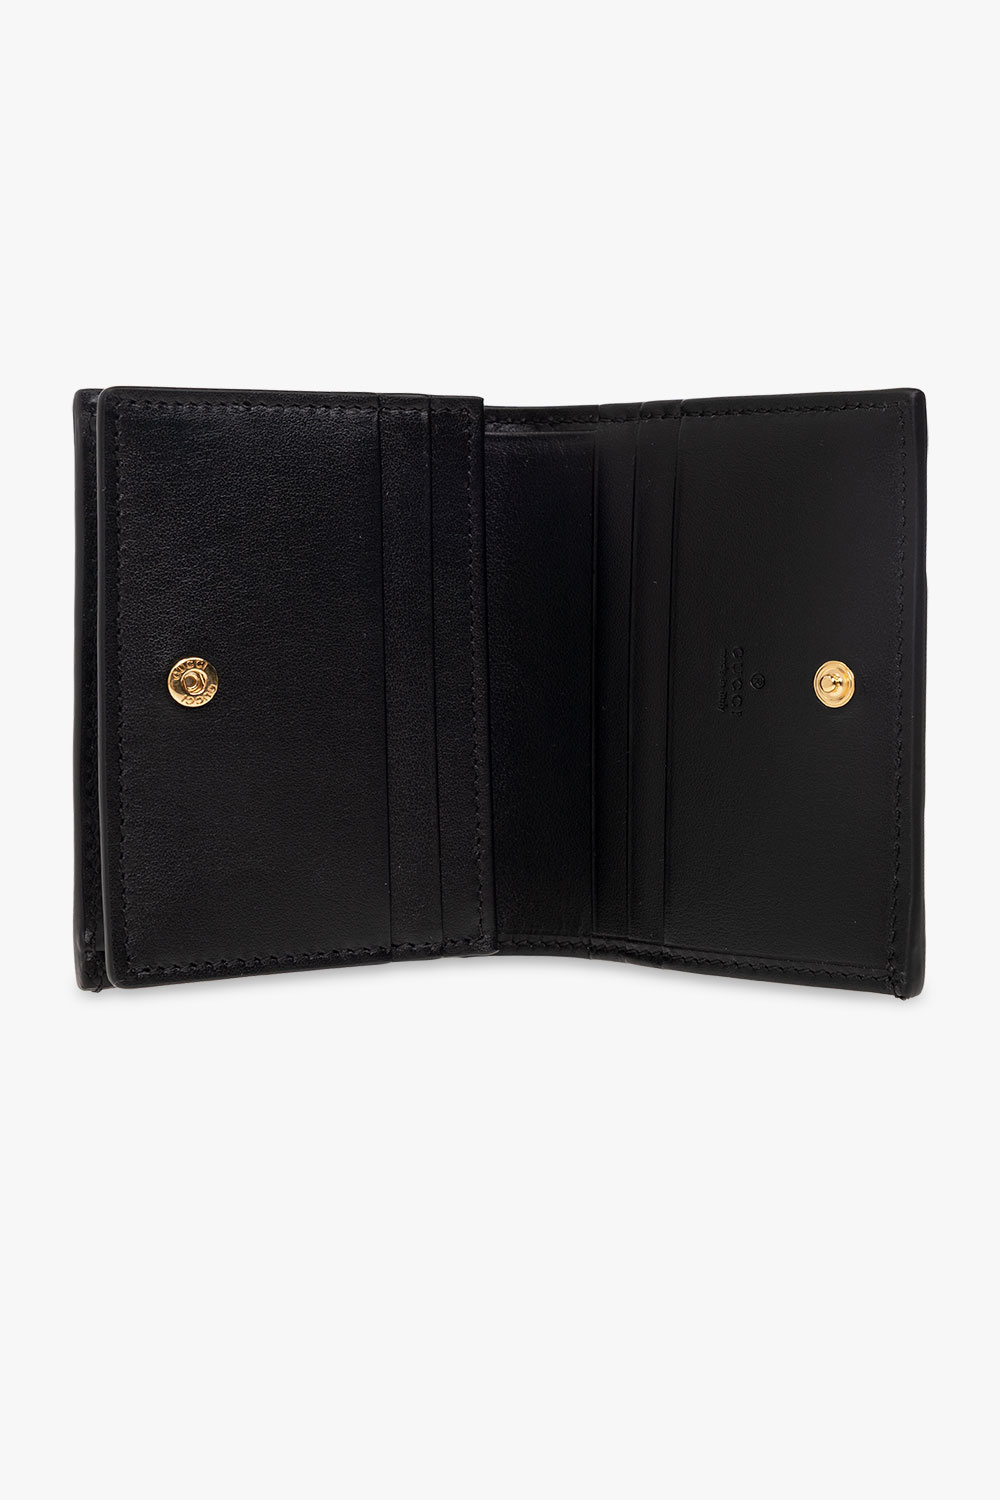 gucci Your Logo wallet with logo